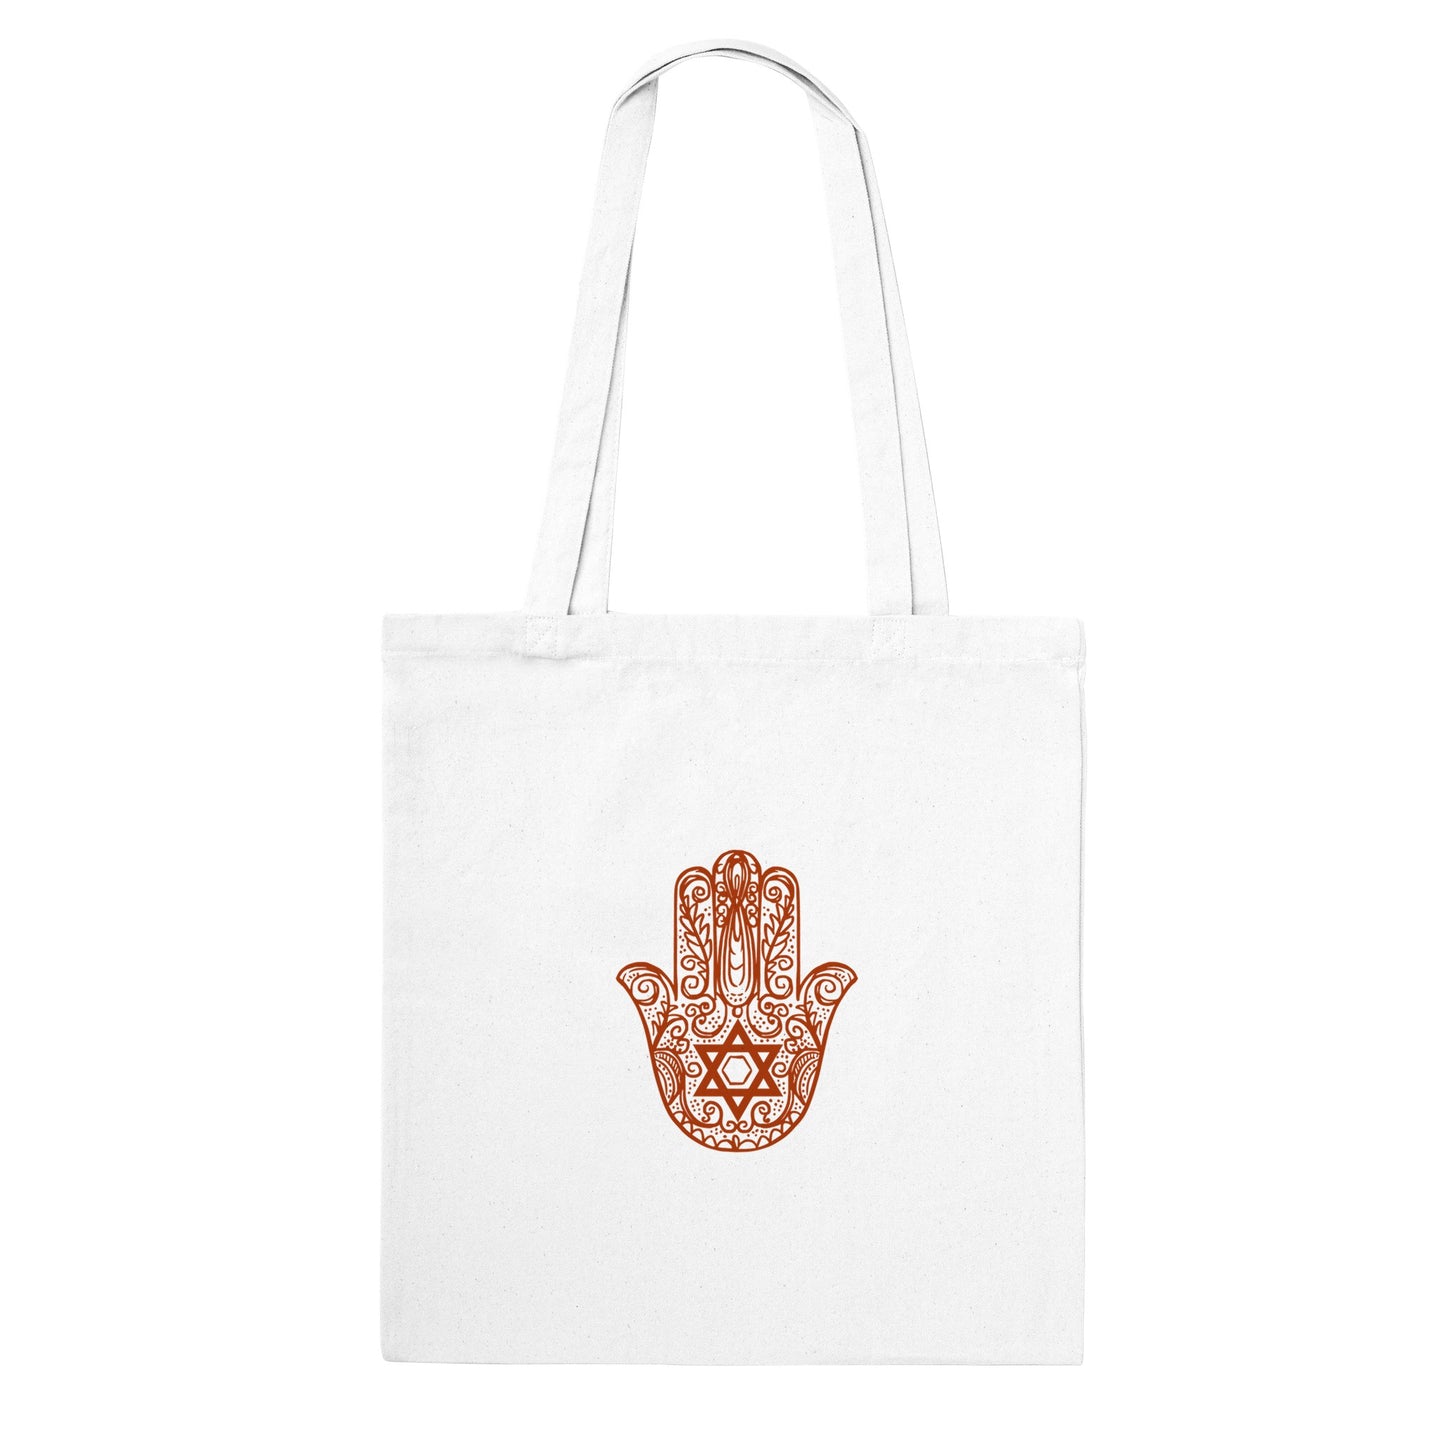 The Tales of Israel Tote Bag with hamsa